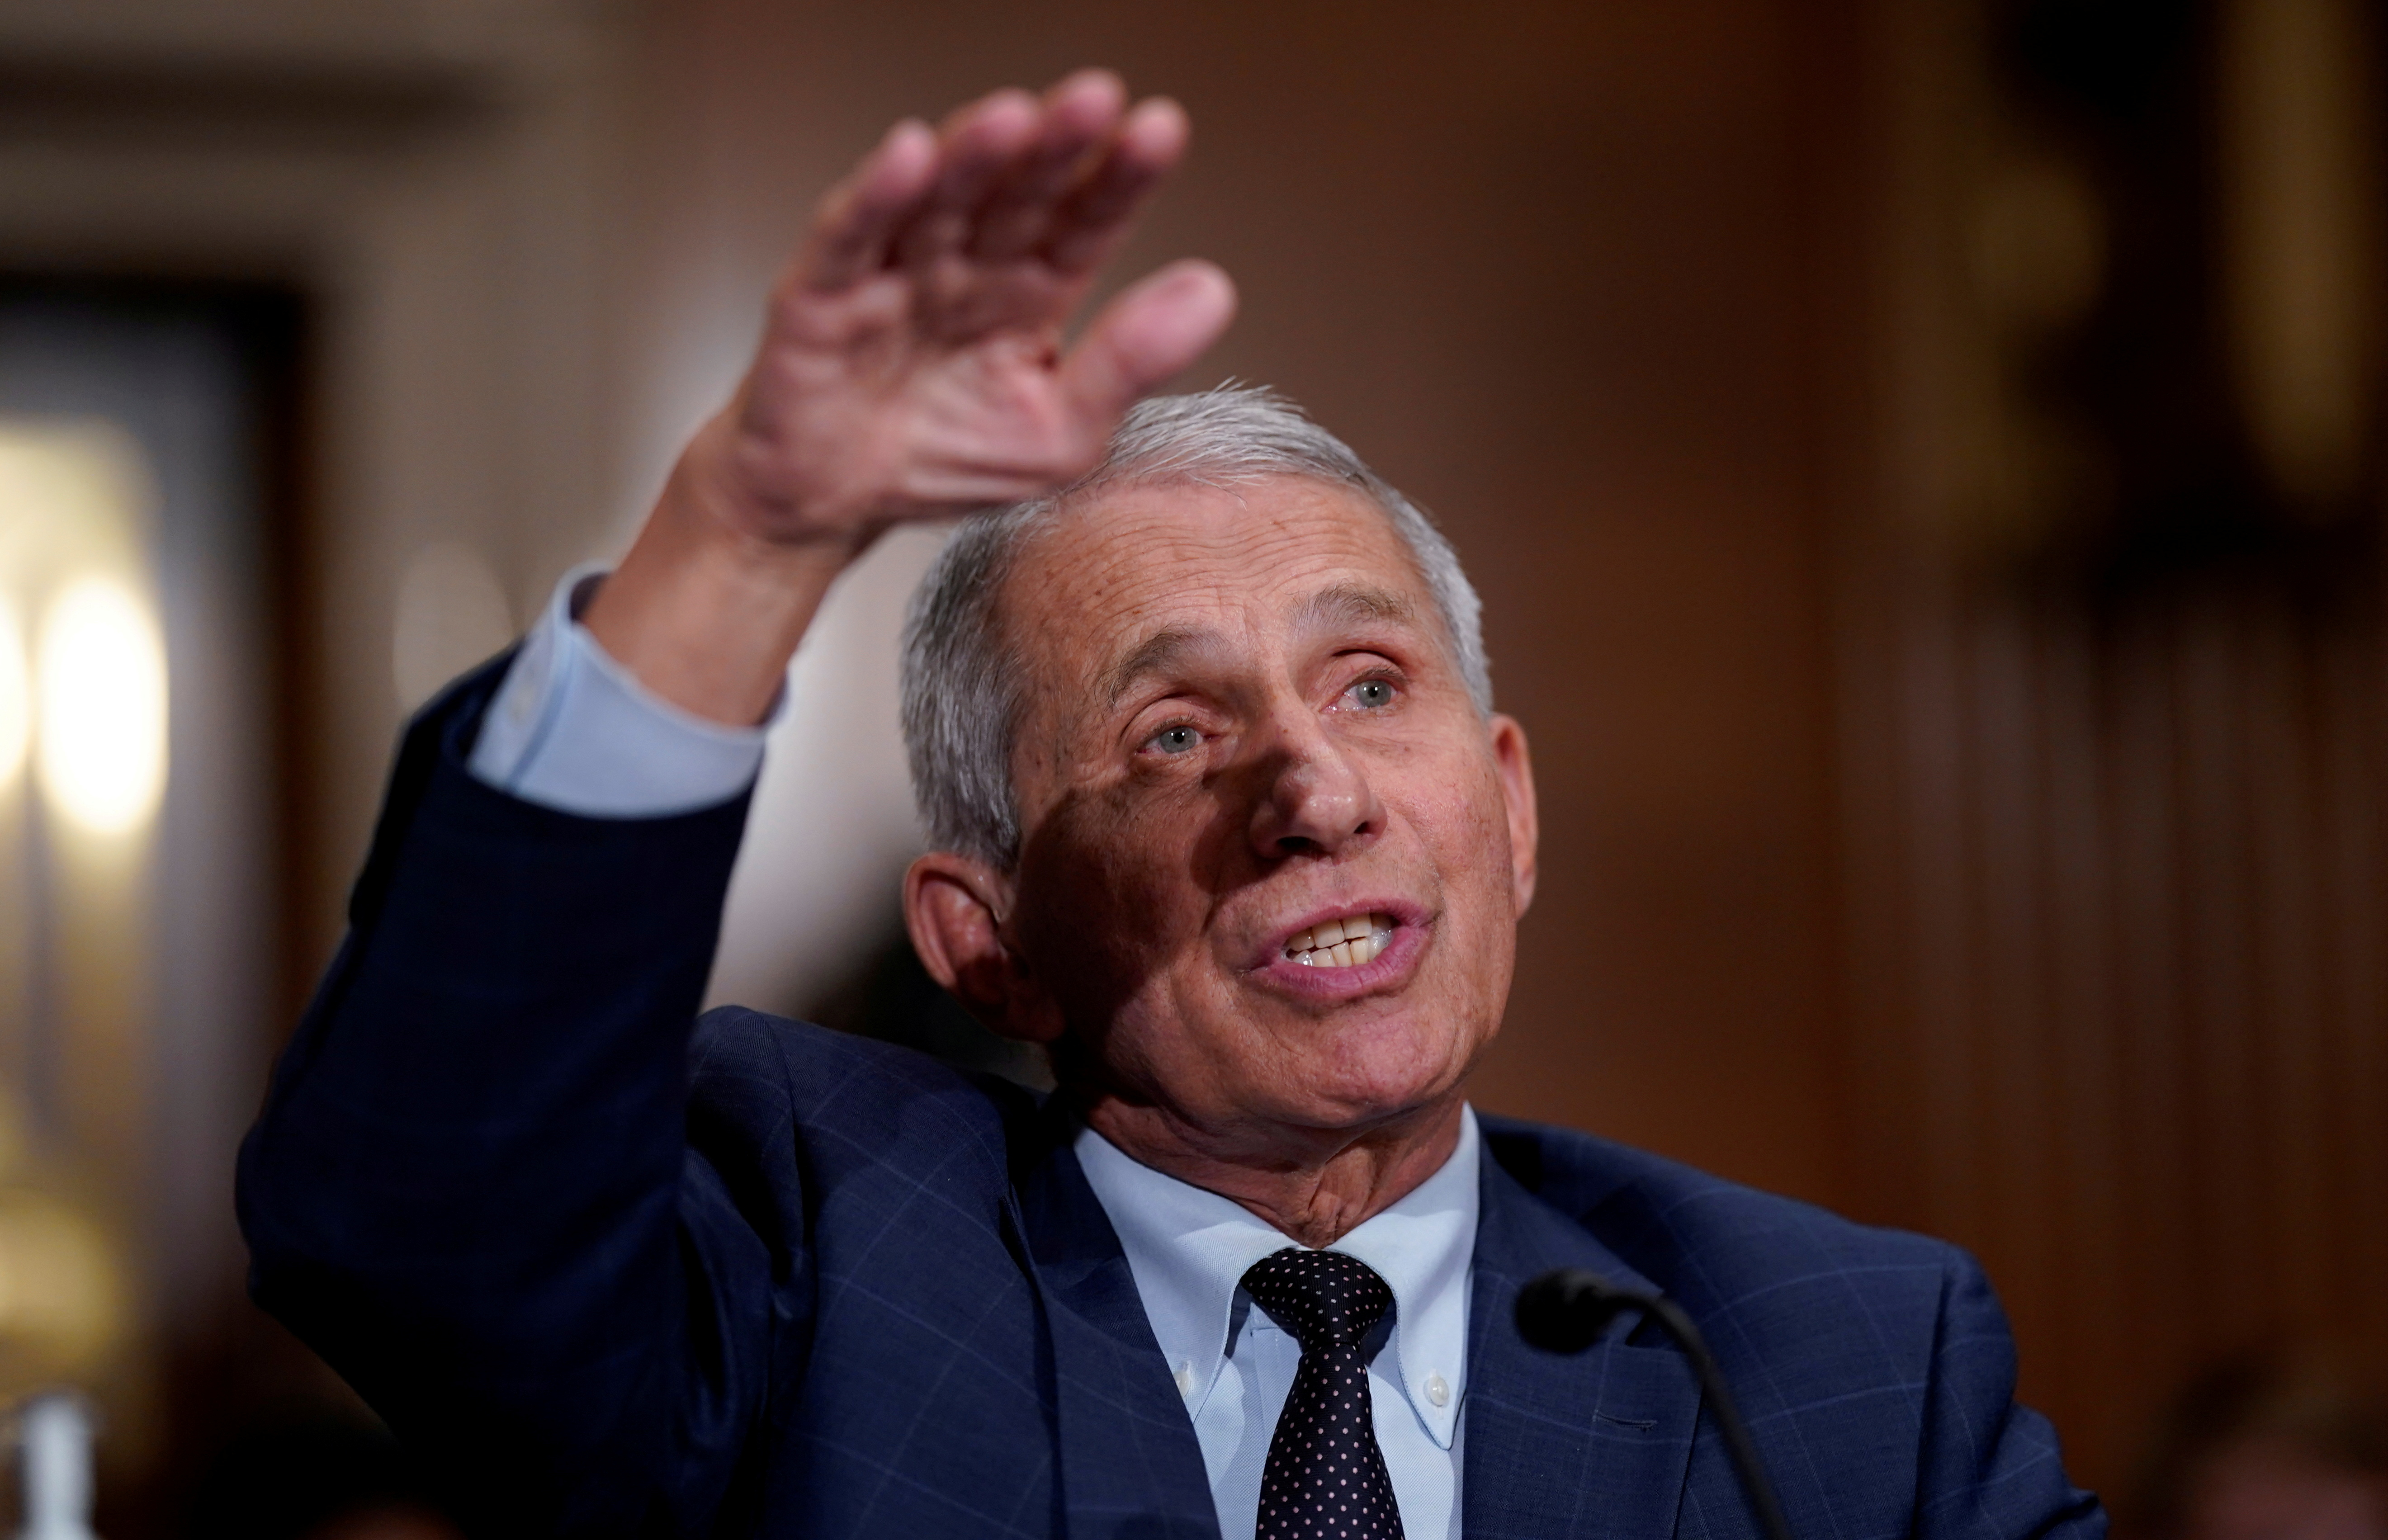 Top infectious disease expert Dr. Anthony Fauci testifies before the Senate Health, Education, Labor, and Pensions Committee on Capitol hill in Washington, D.C., U.S., July 20, 2021. J. Scott Applewhite/Pool via REUTERS